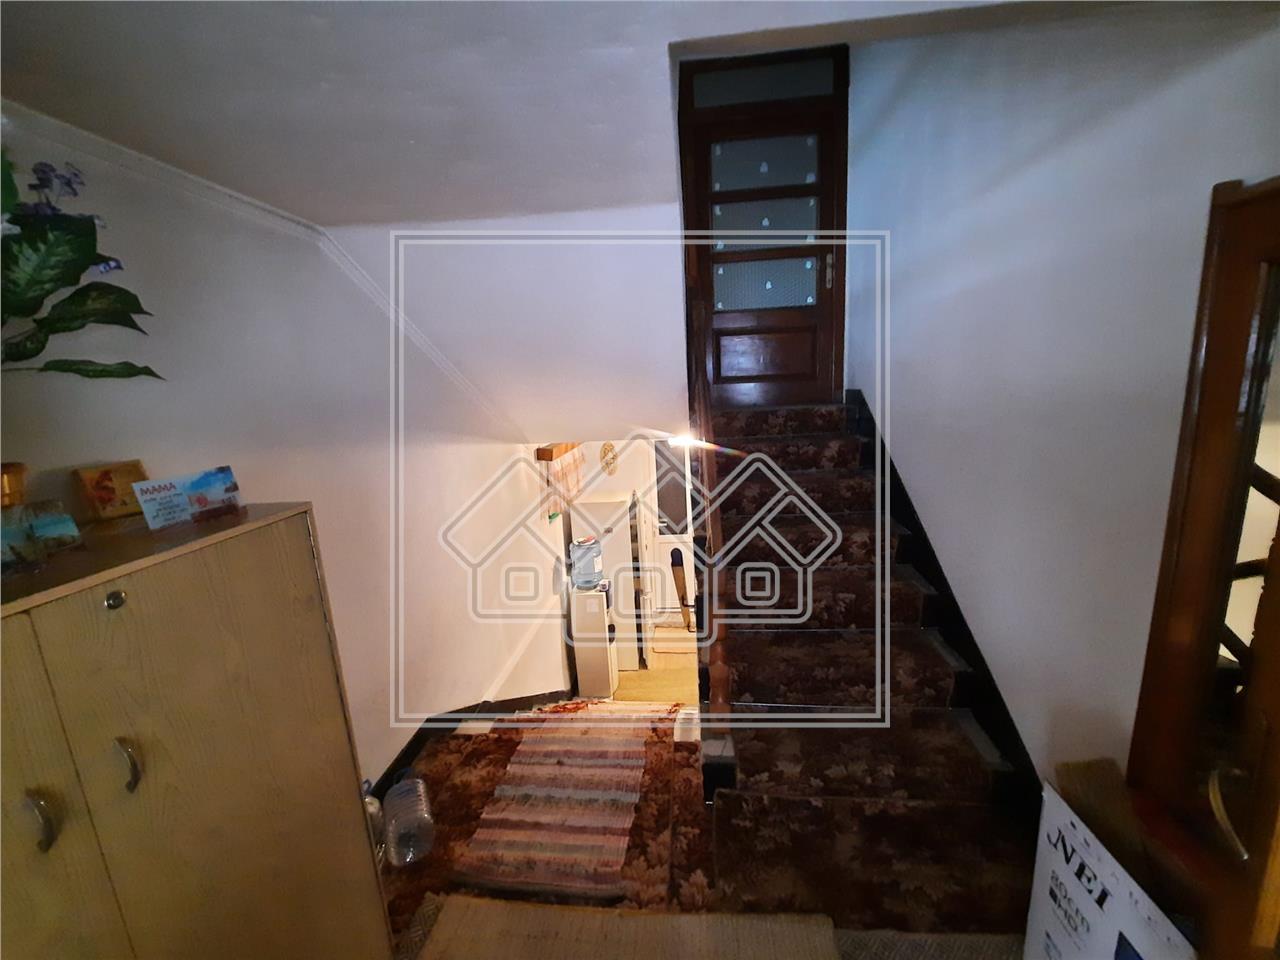 House for sale in Sibiu - halls, land 1000sqm, 2 streets - Cisnadie